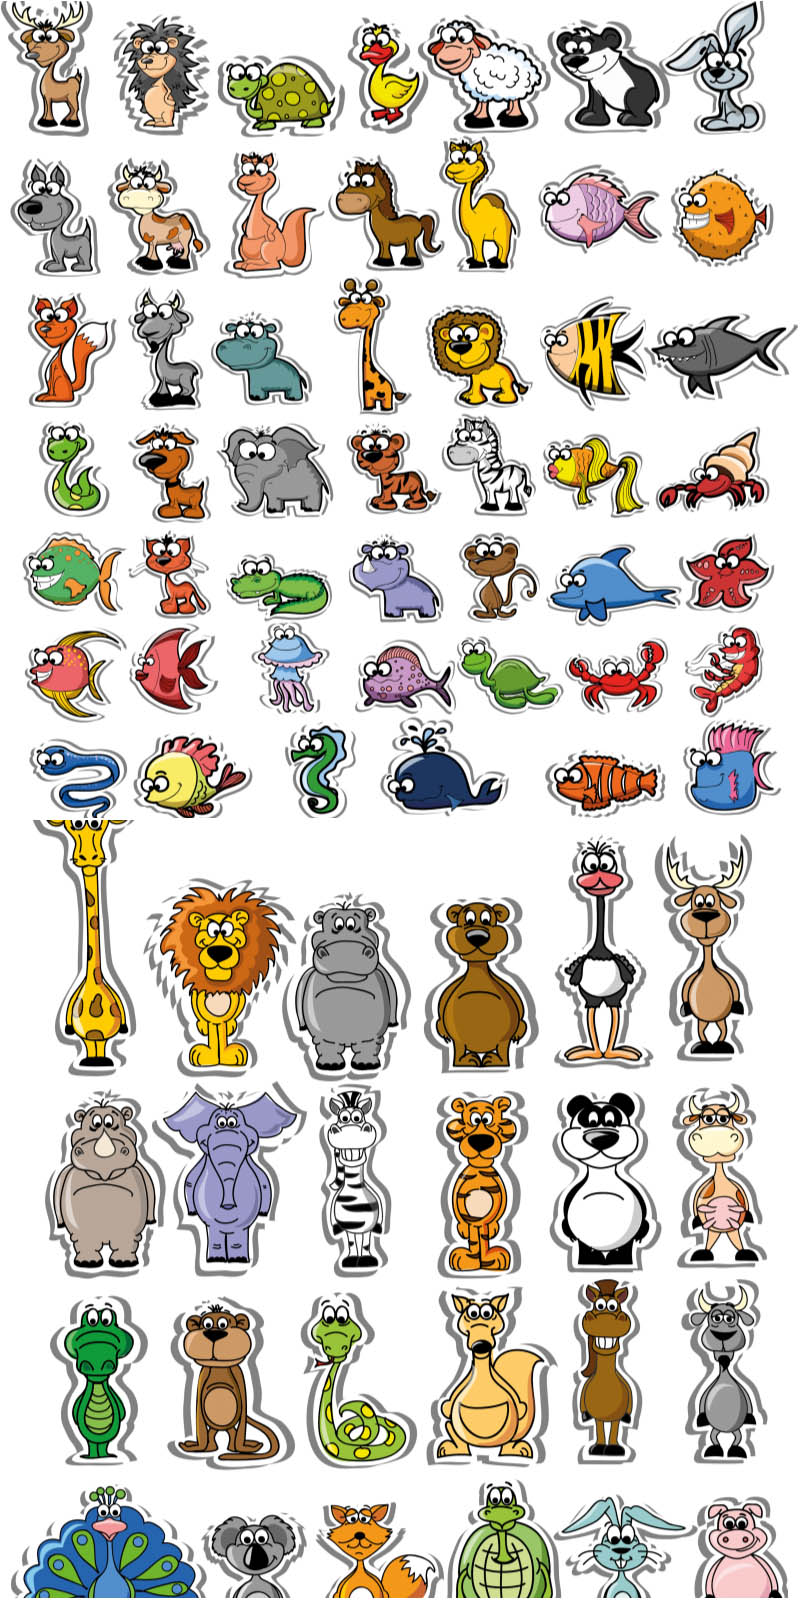 Funny cartoon animals sticker vector 2020 – Free Download Images, Clip art  Graphics ai or eps format | VectorPicFree